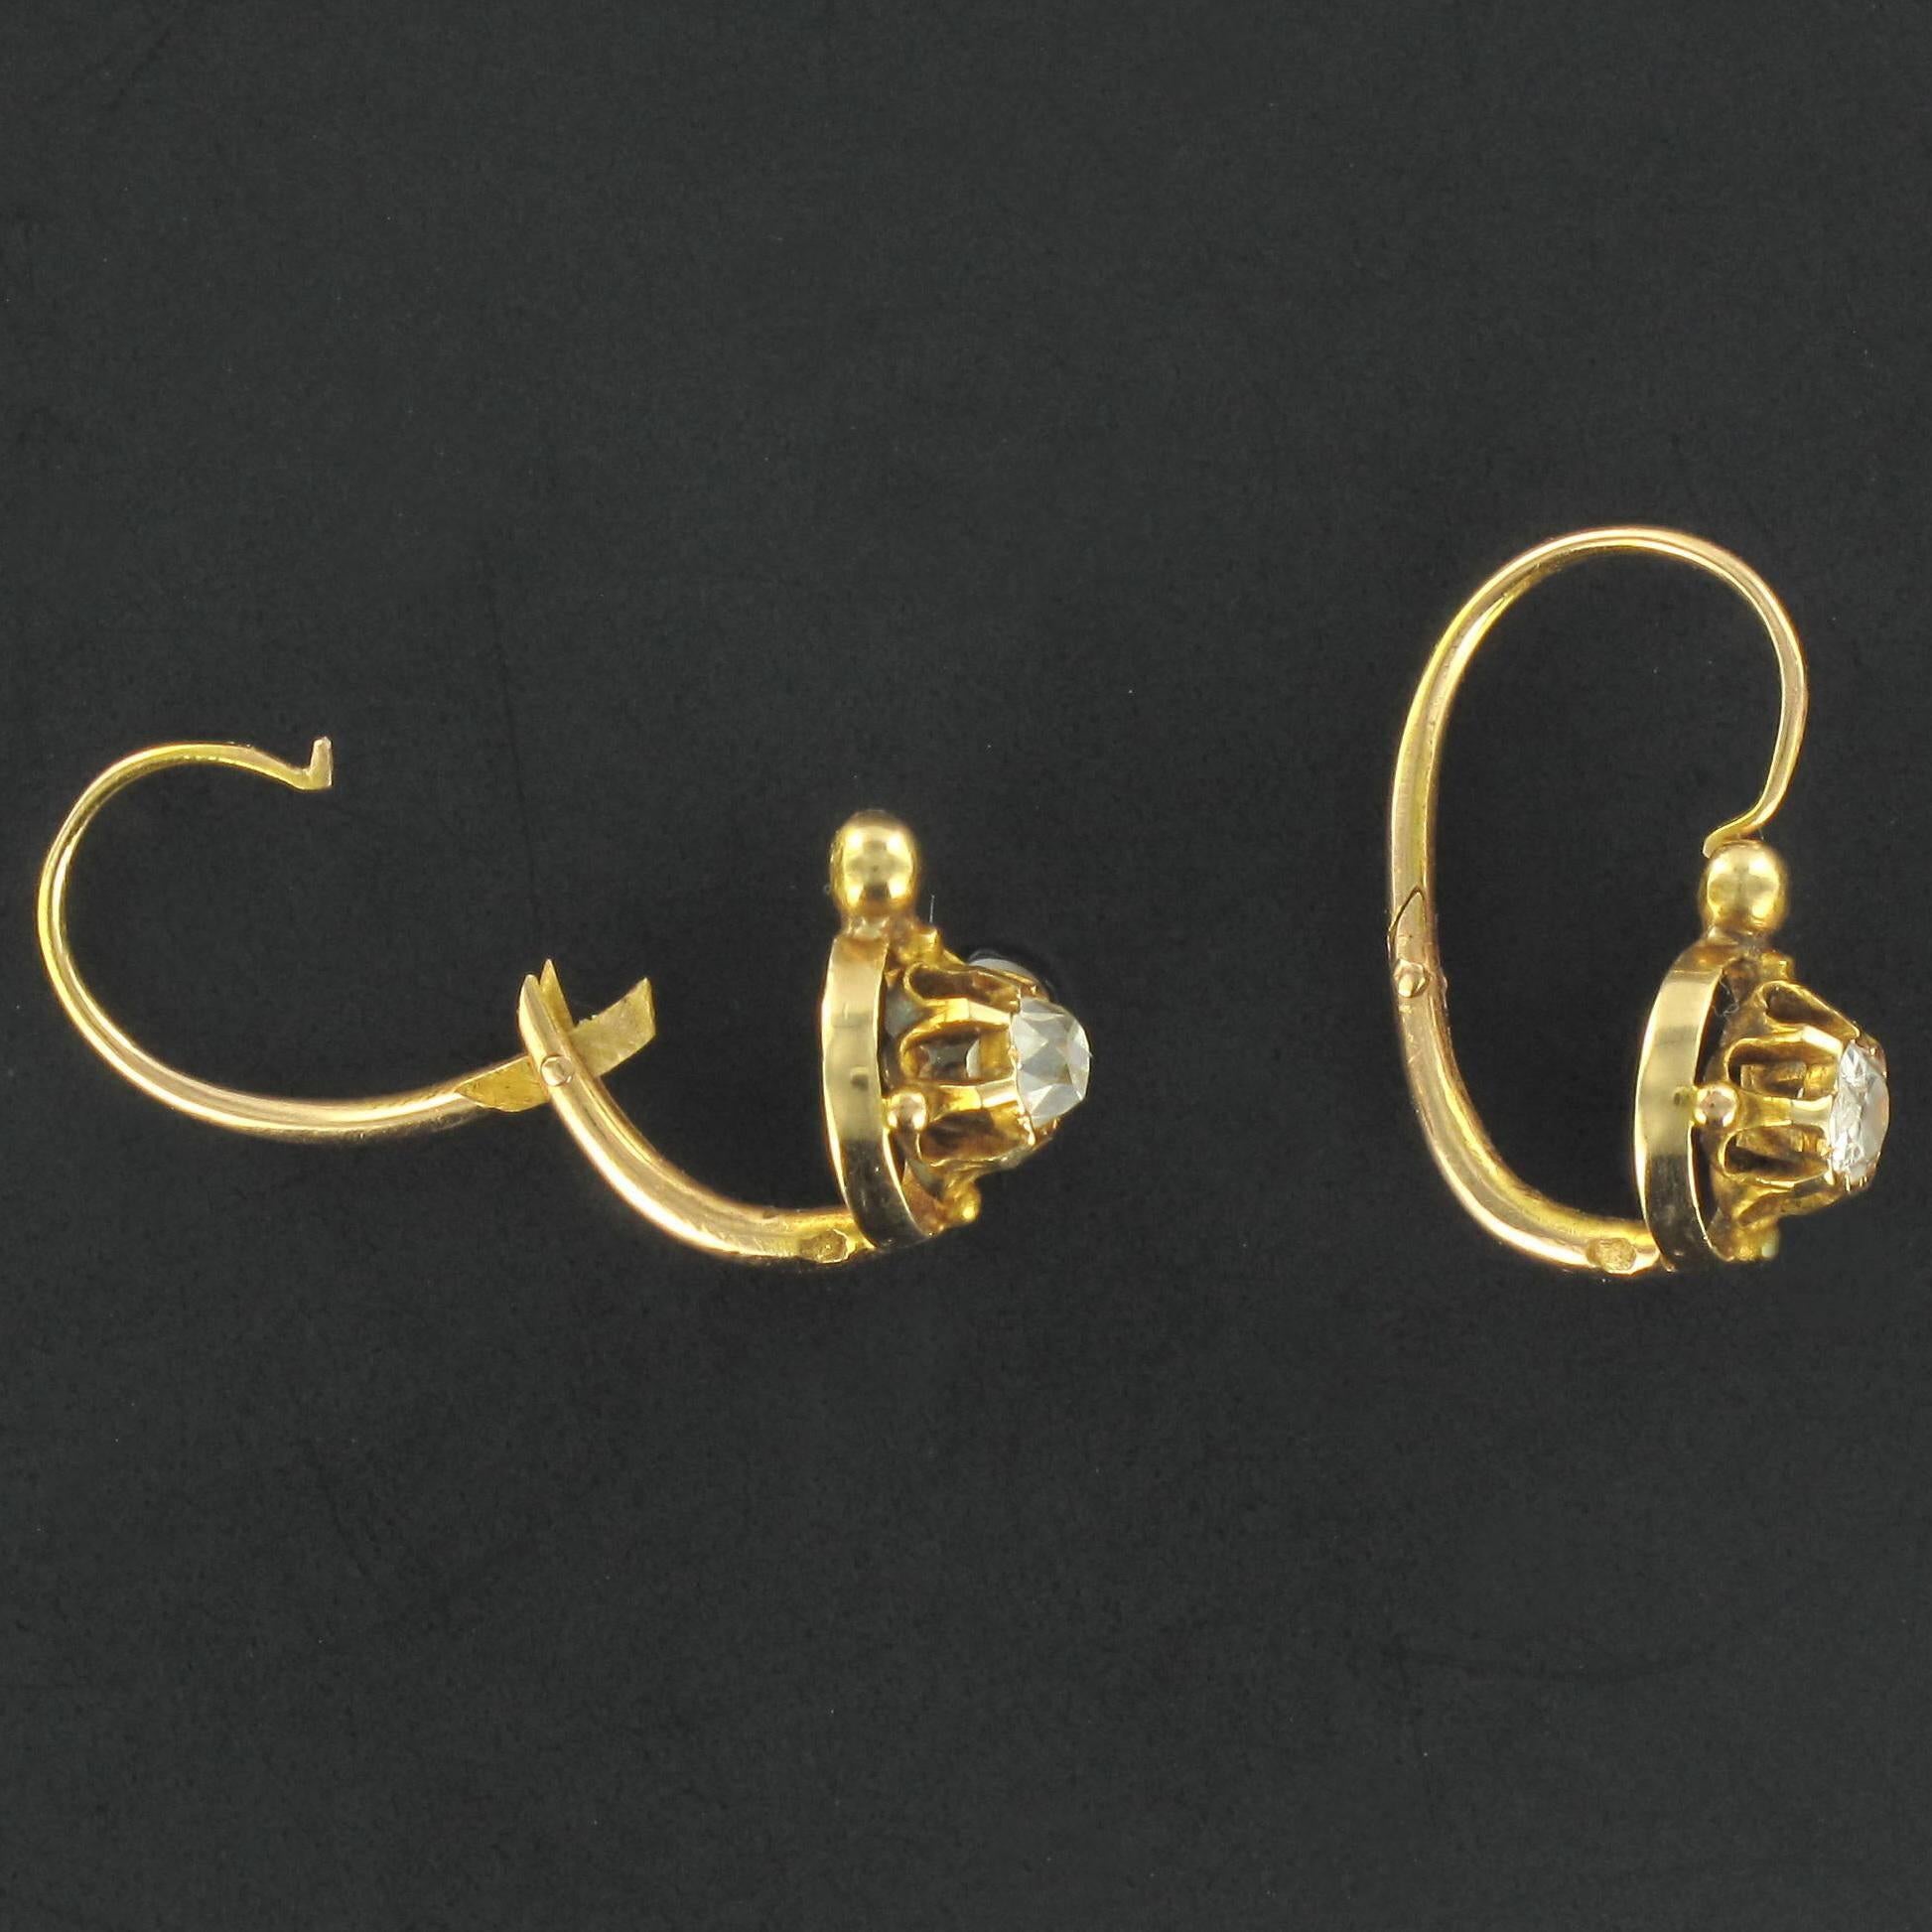 Earrings in 18K yellow gold, eagle head hallmark.

Each charming antique earring has a claw set cushion cut antique diamond accentuated at the four cardinal points with a small golden bead, with a larger gold bead above. The clasps are at the